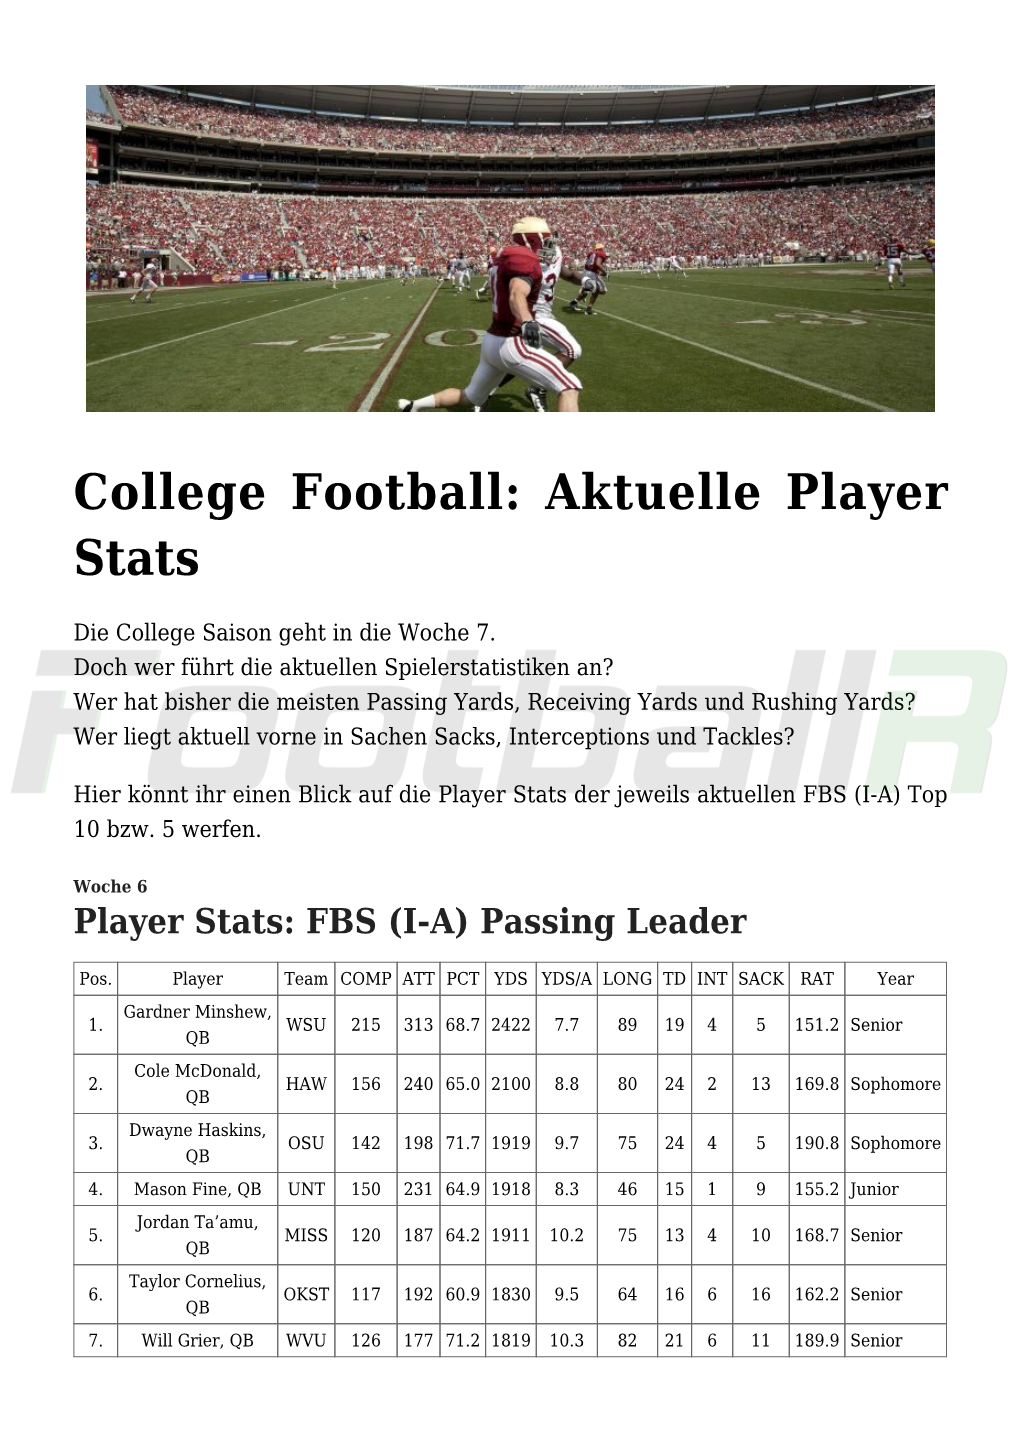 College Football: Aktuelle Player Stats